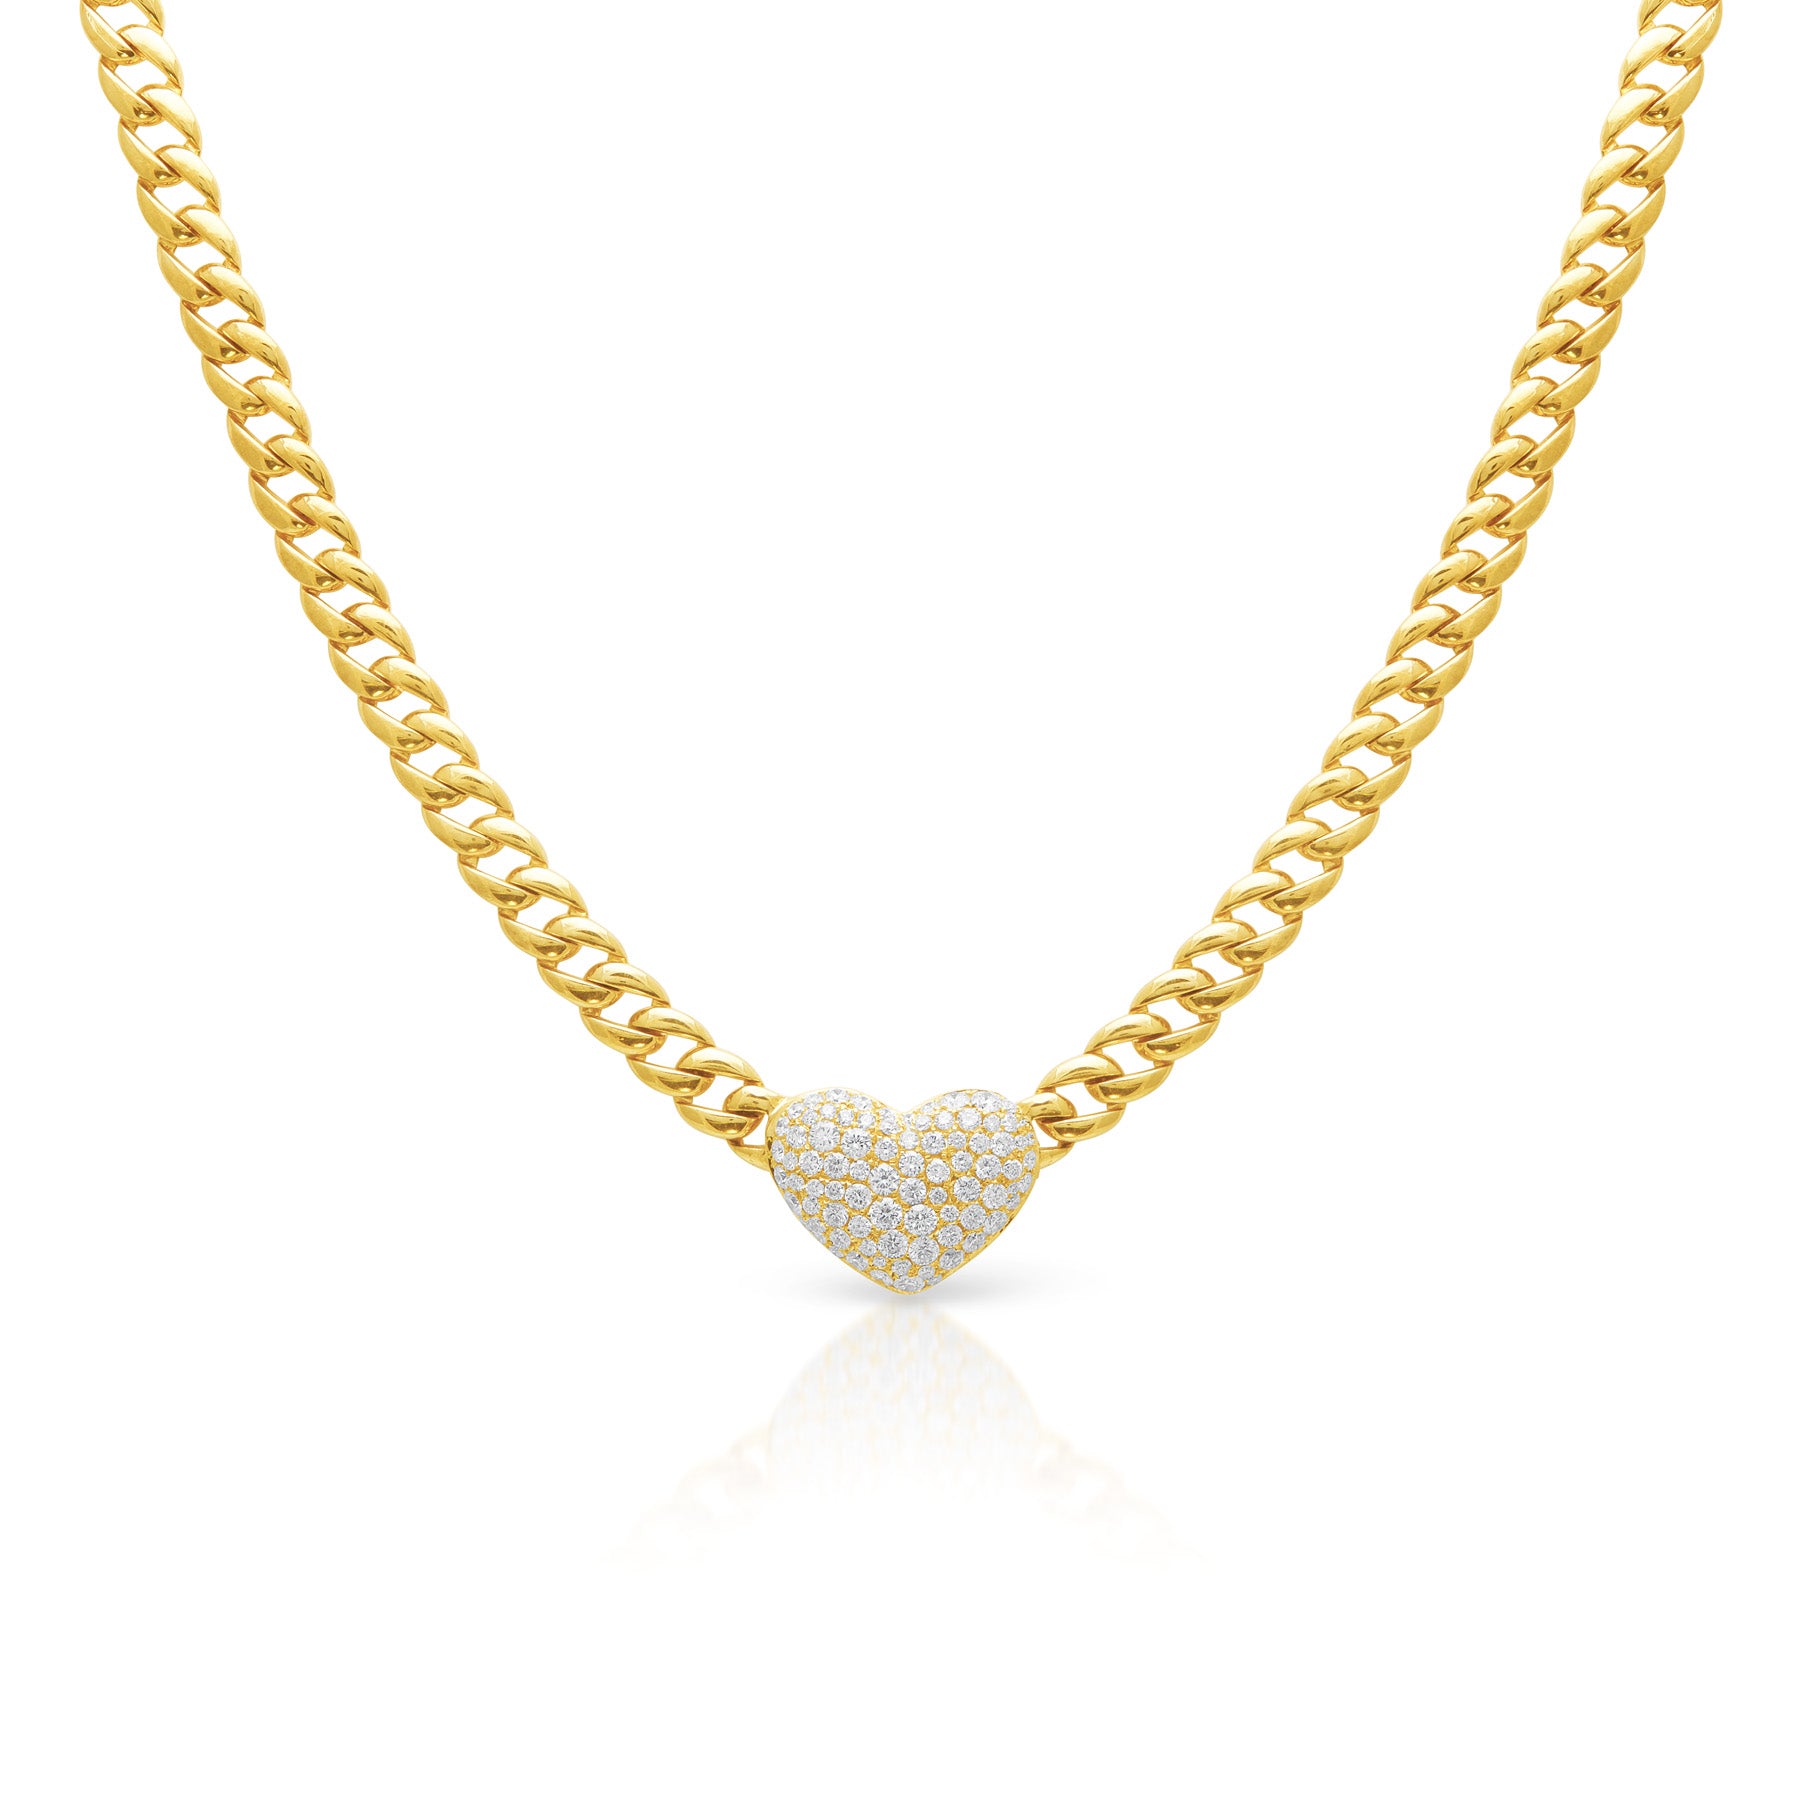 14KT Yellow Gold Diamond Princess Heart Chain Link Necklace